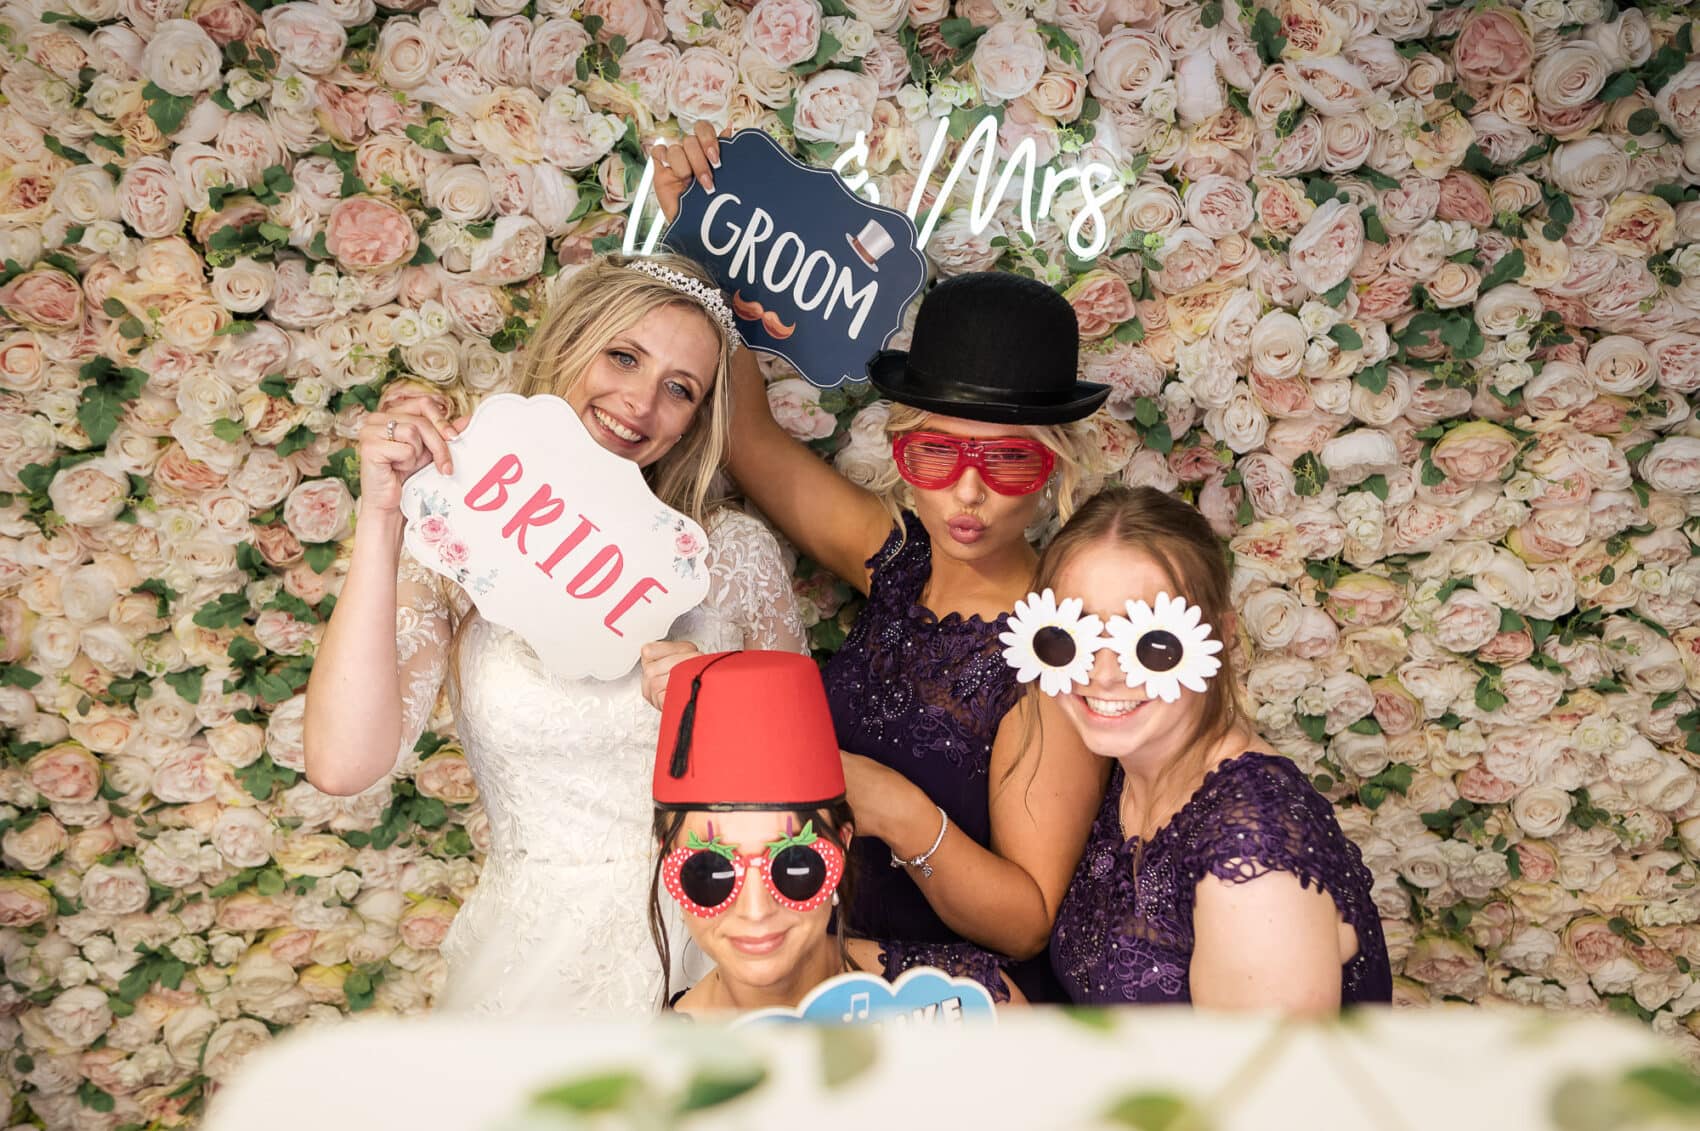 Bride Tribe in the photobooth